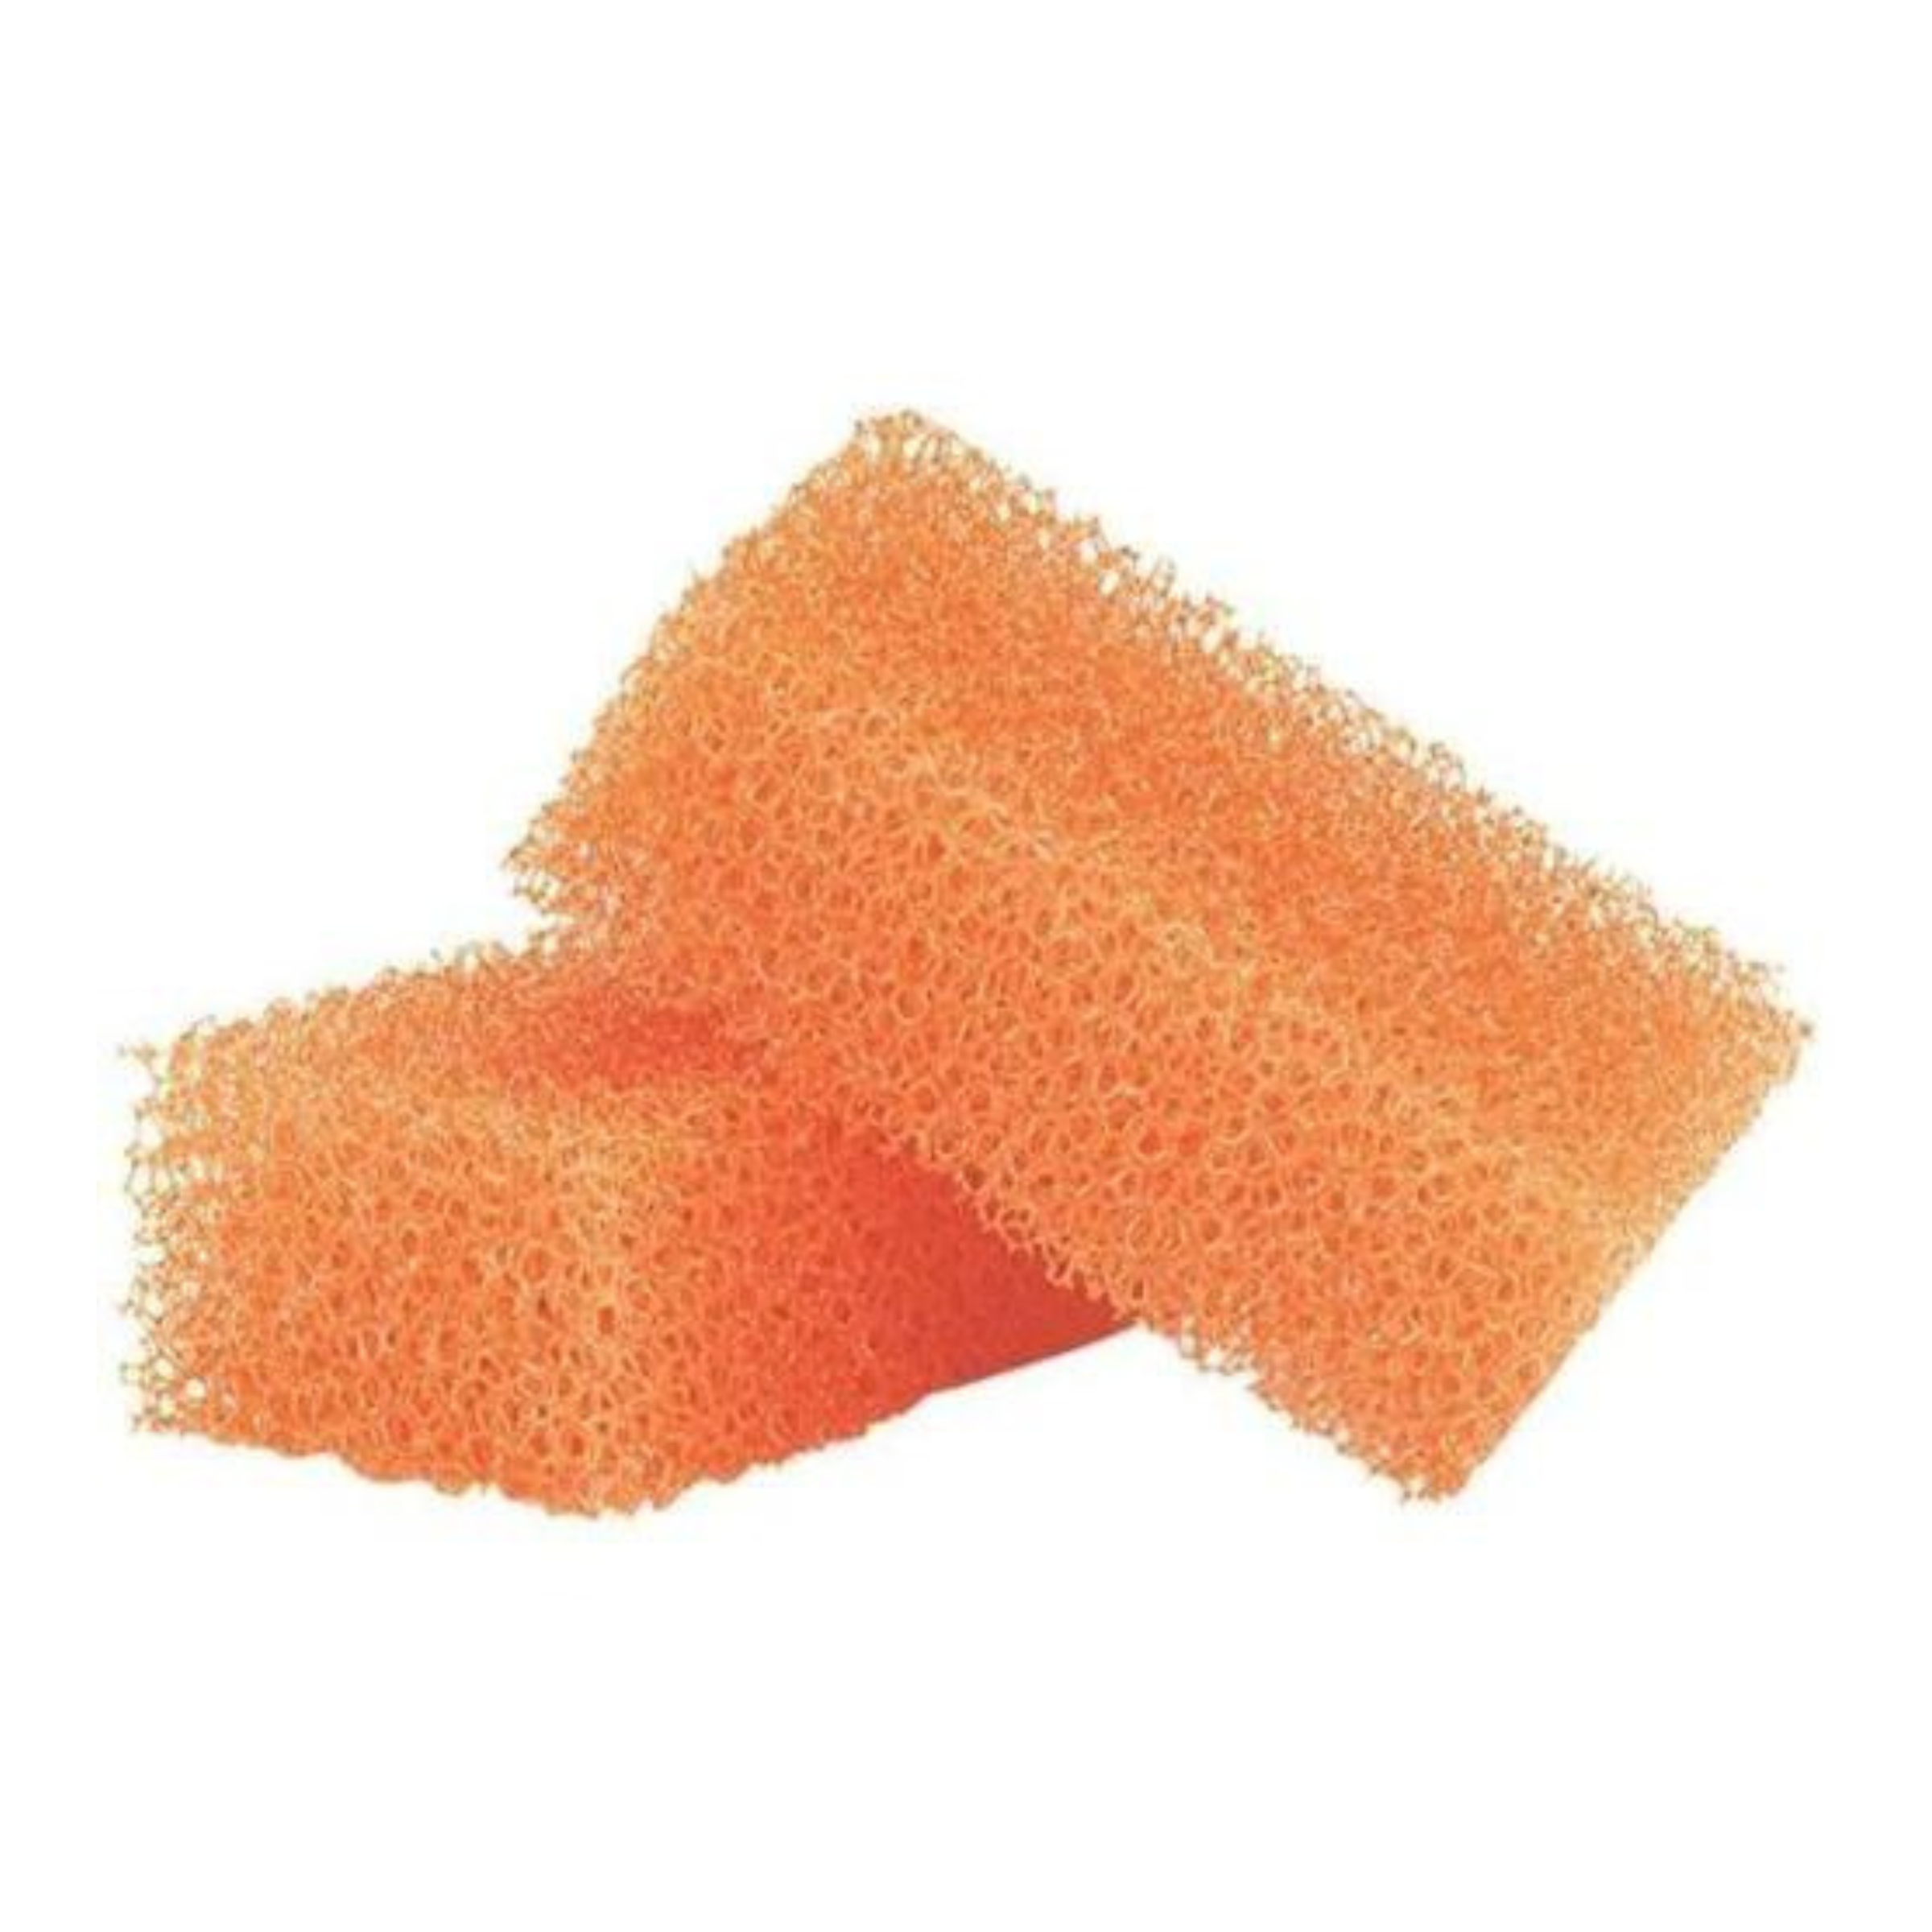 Two orange sponges pictured on a white background. 